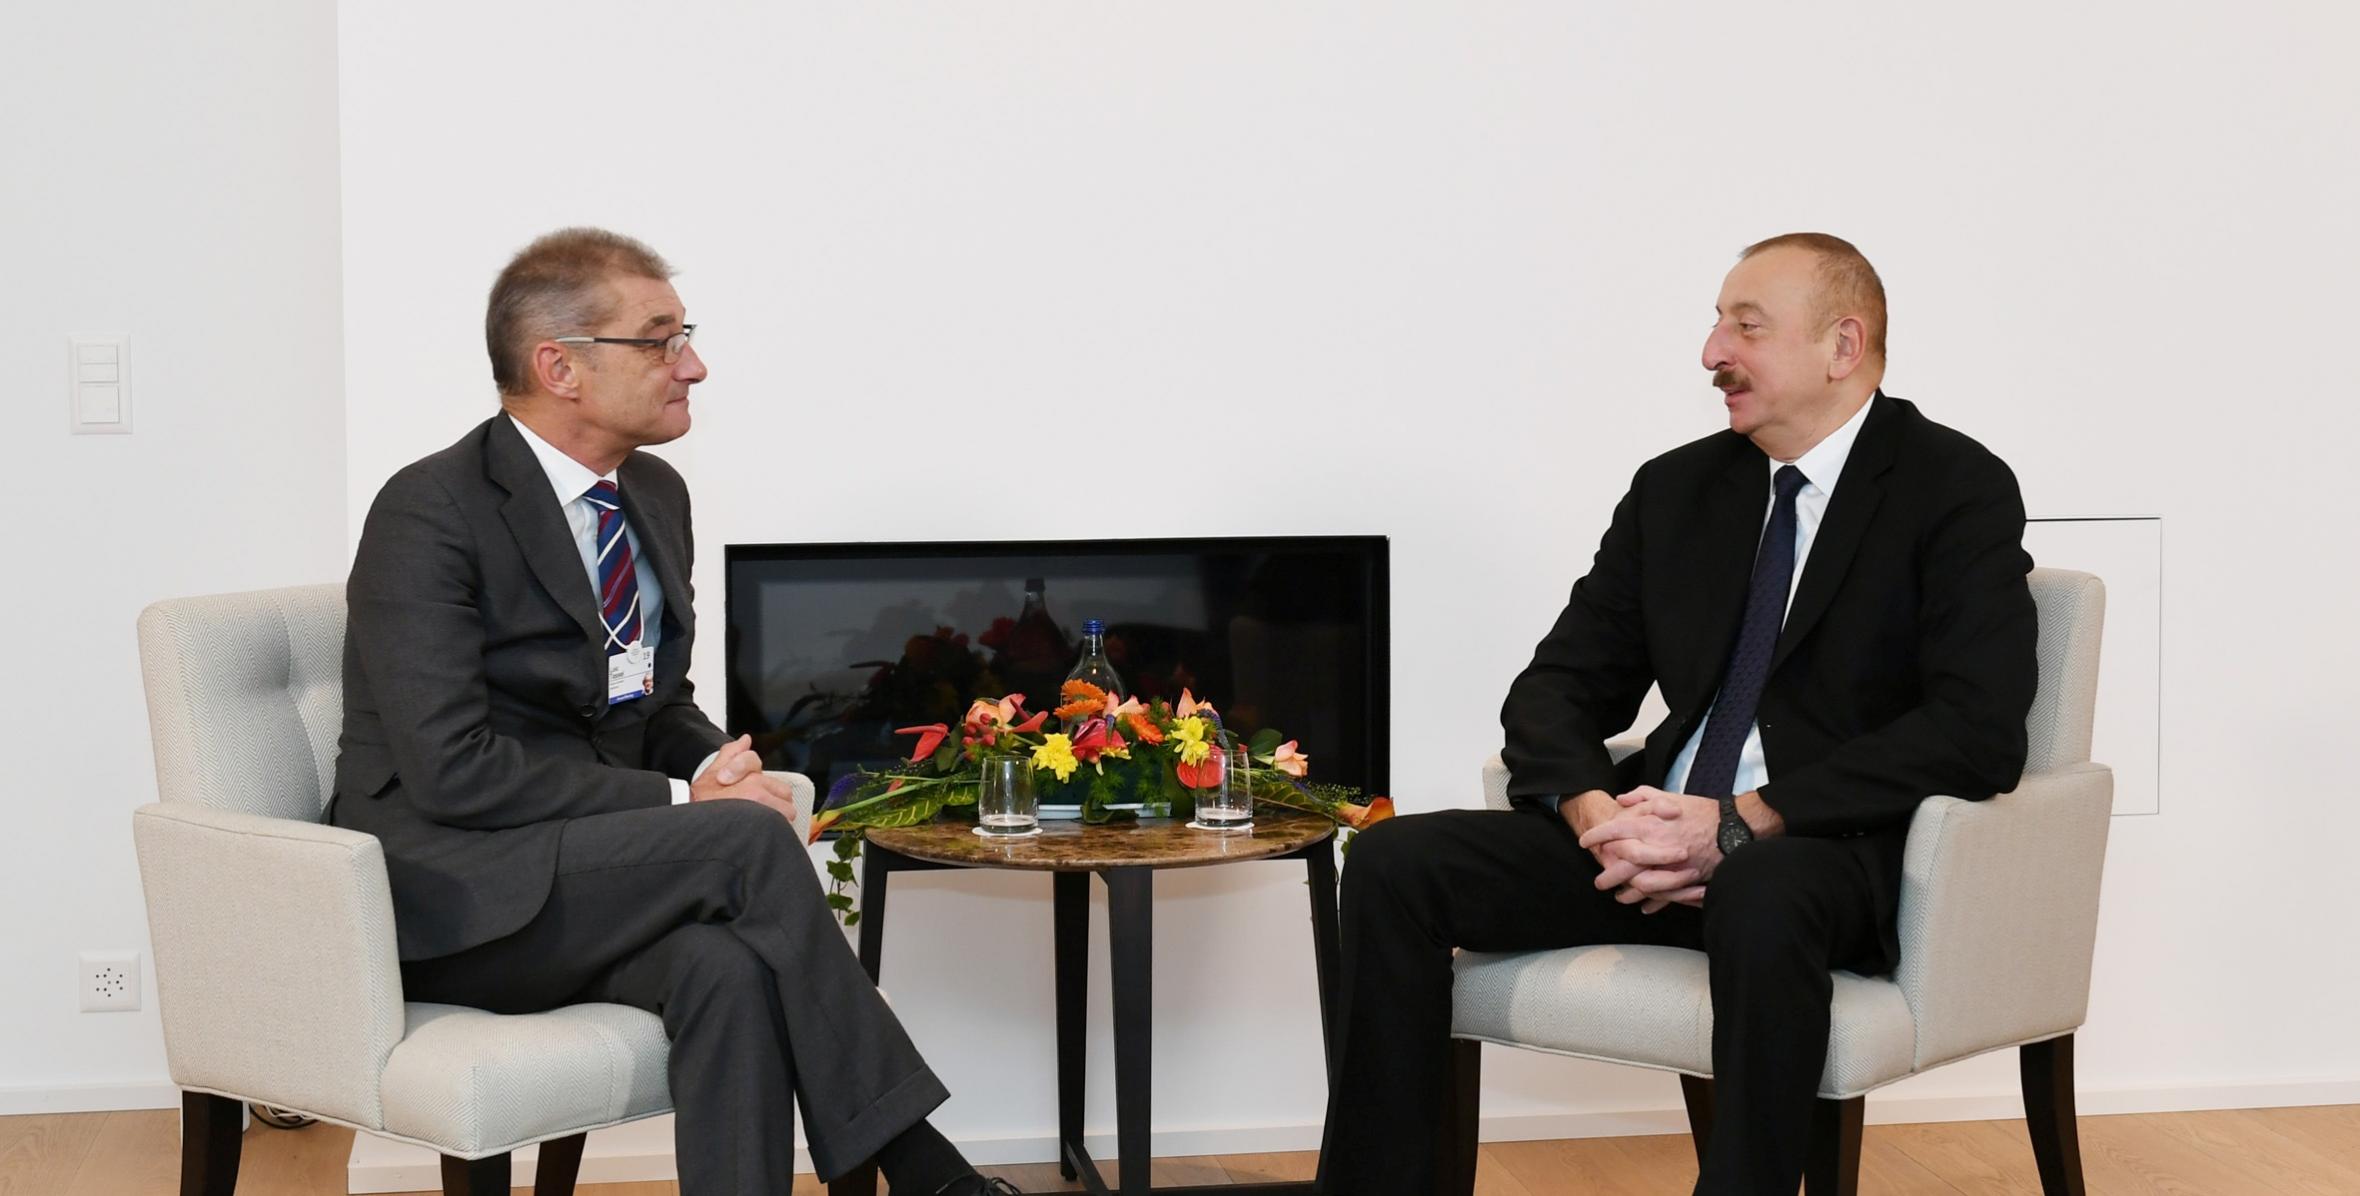 Ilham Aliyev met with president of Europe Selling & Market Operations at Procter & Gamble in Davos